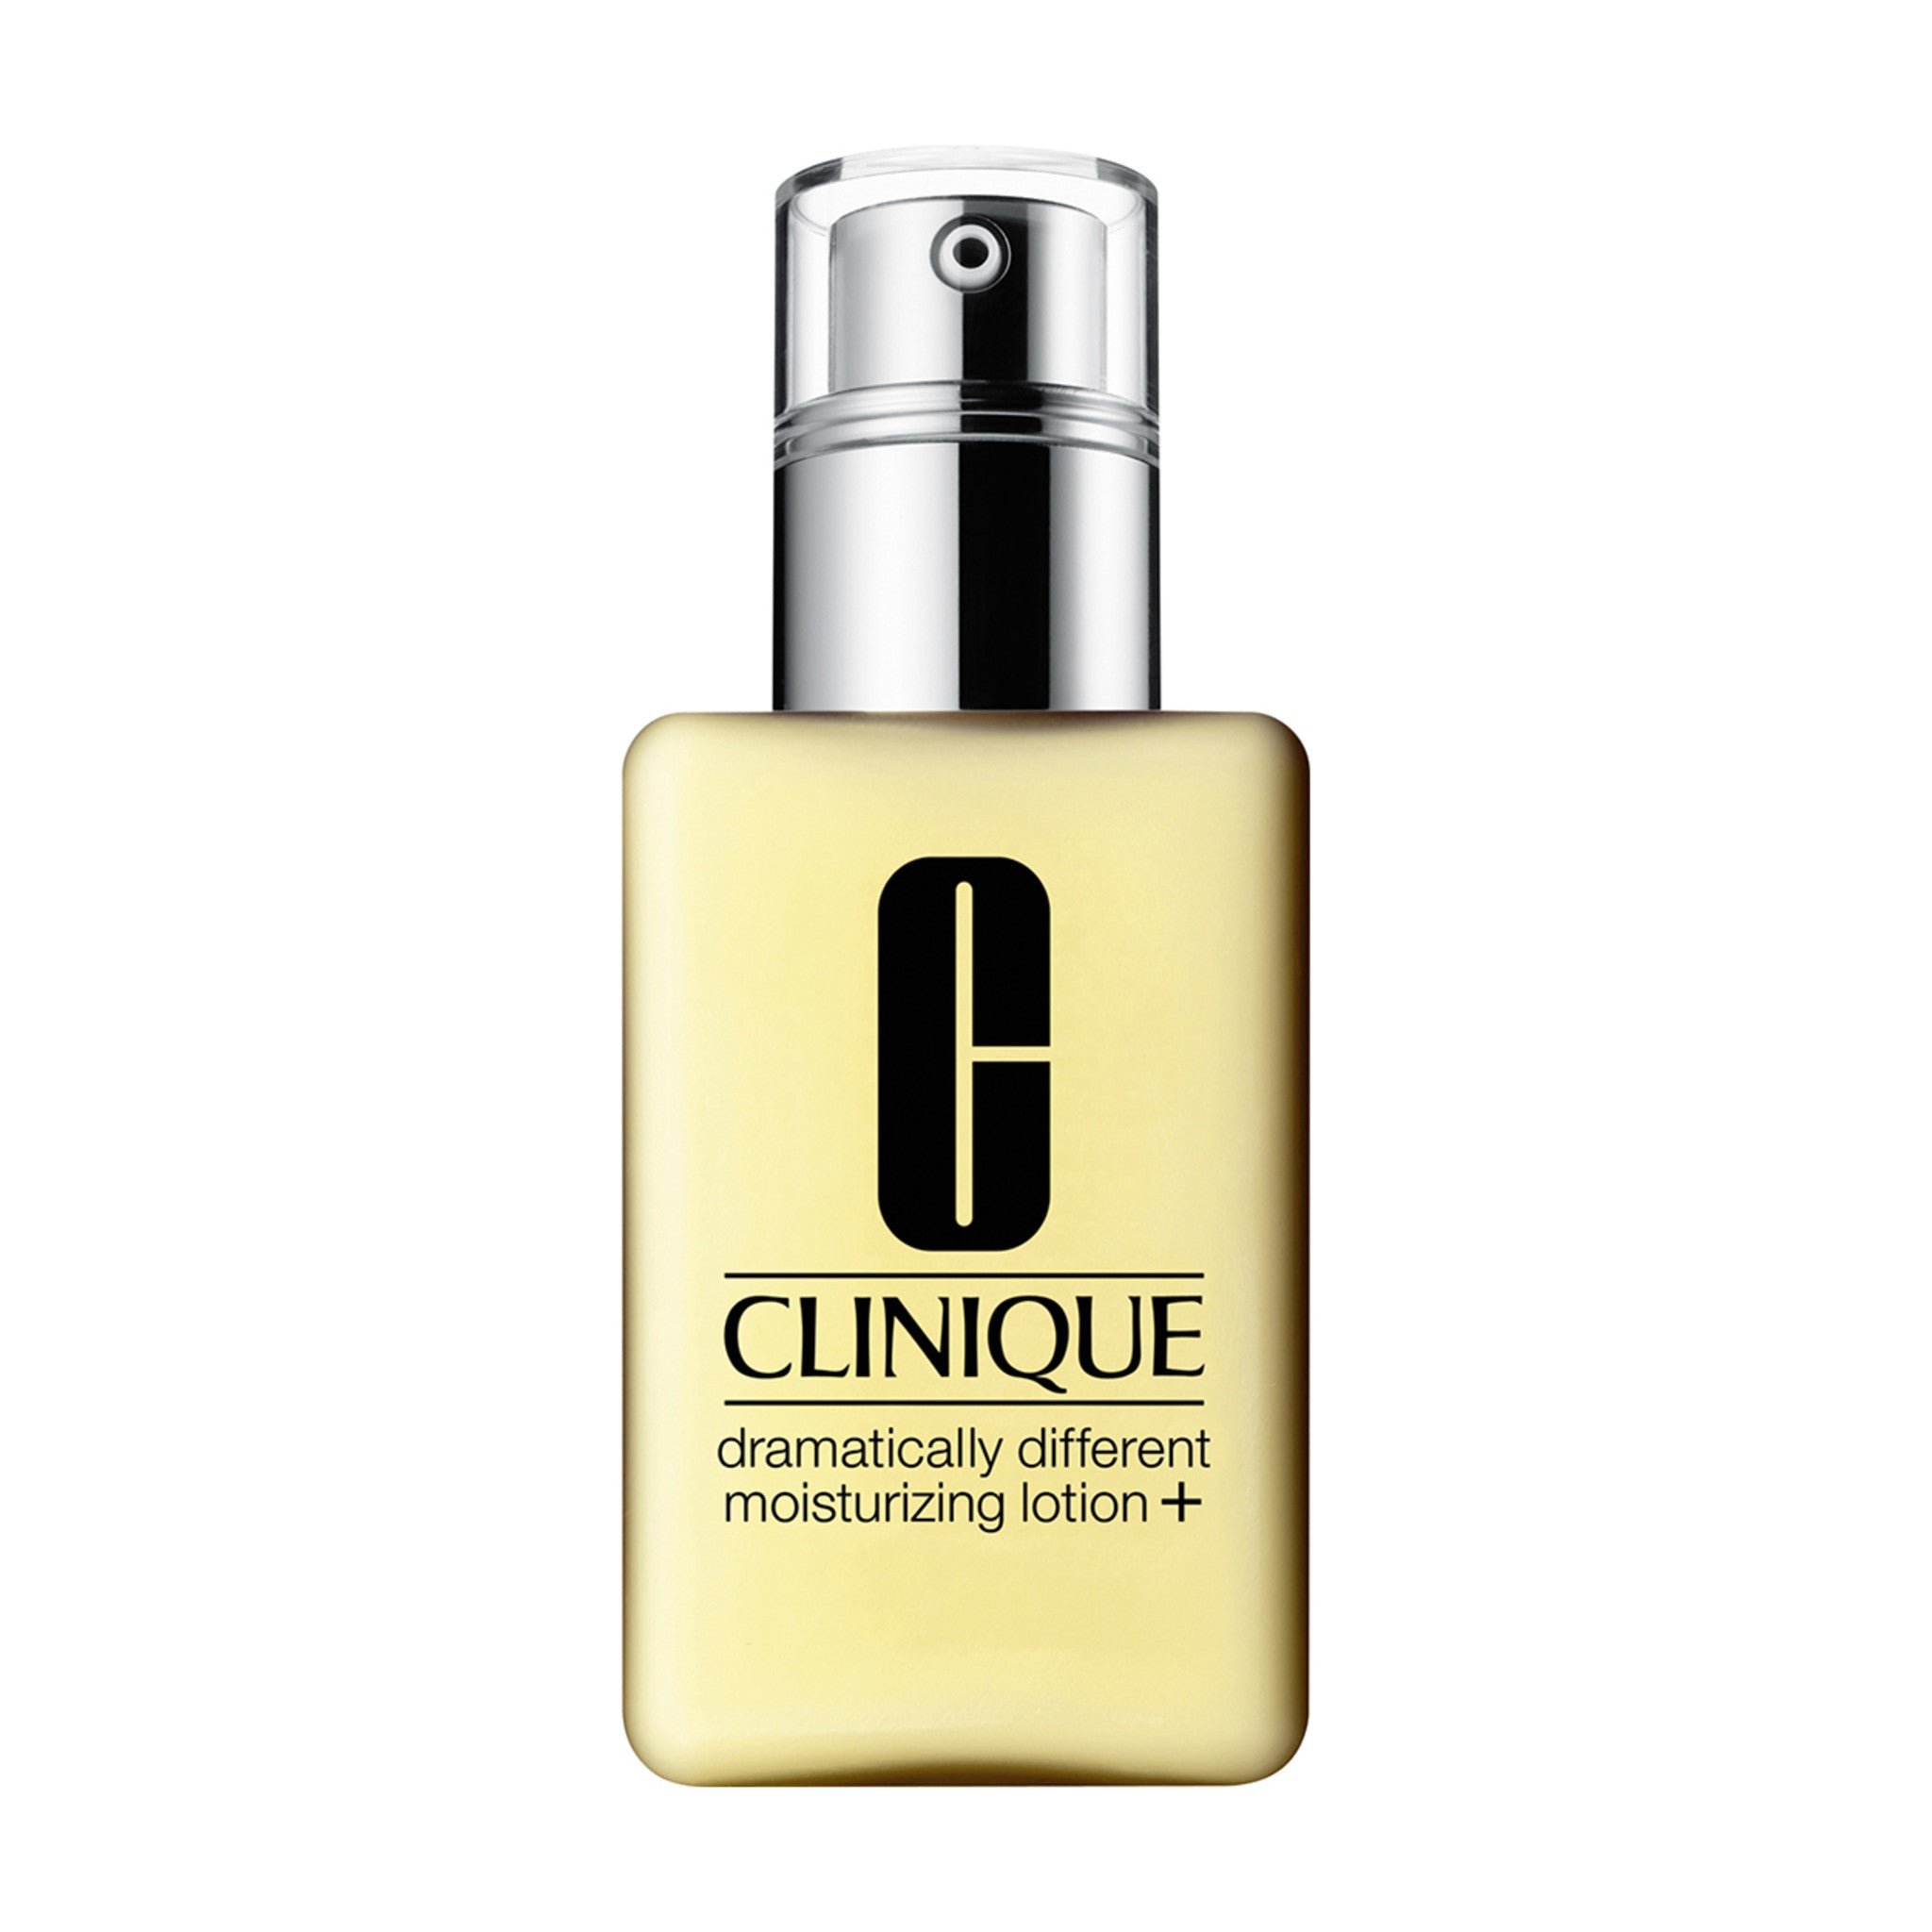 Clinique Dramatically Different Moisturizing Lotion Size variant: 4.2 OZ